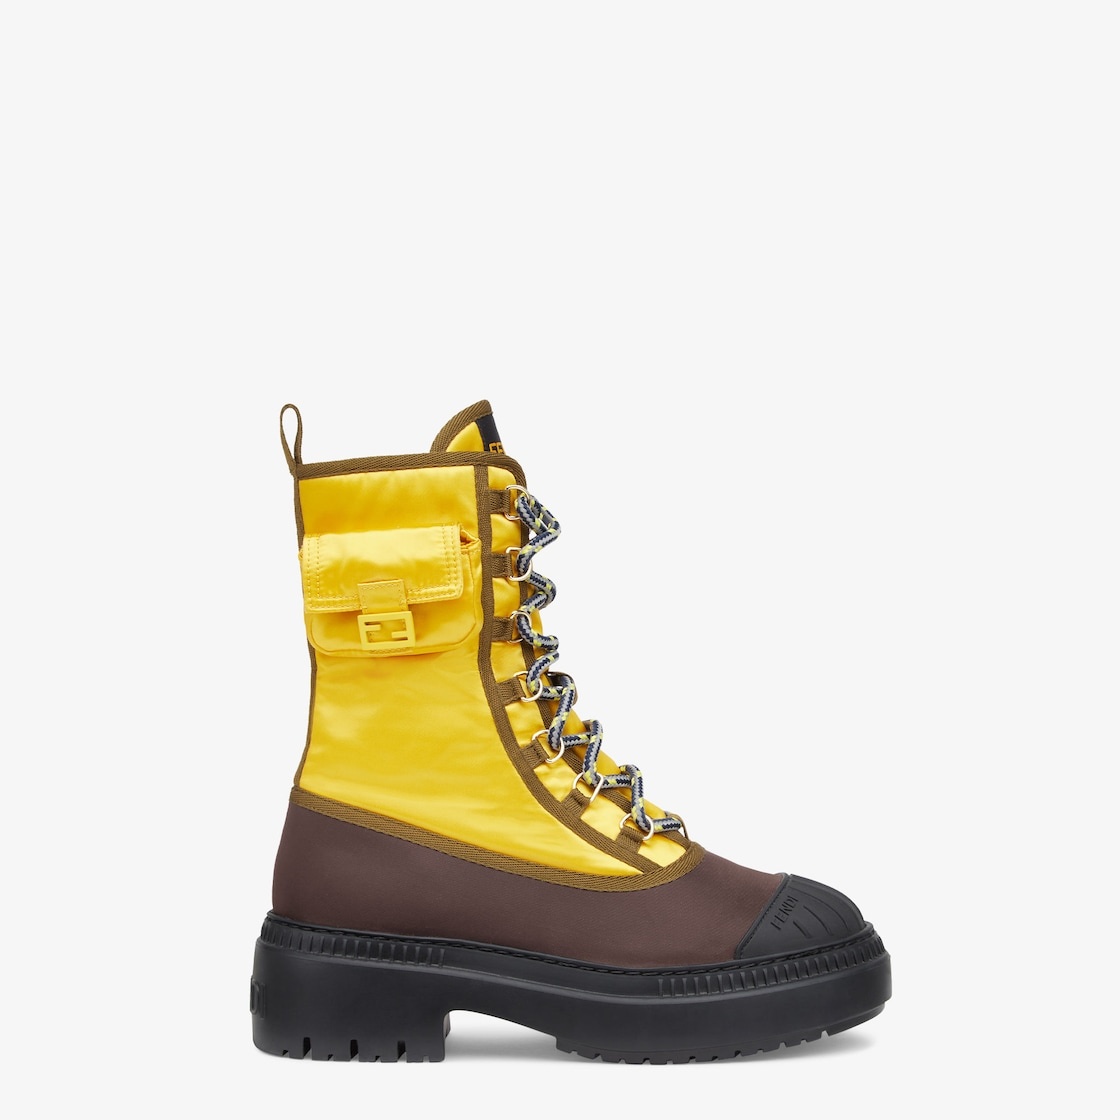 Special edition Domino biker boots in celebration of the Baguette bag’s 25th Anniversary, with Bague - 1